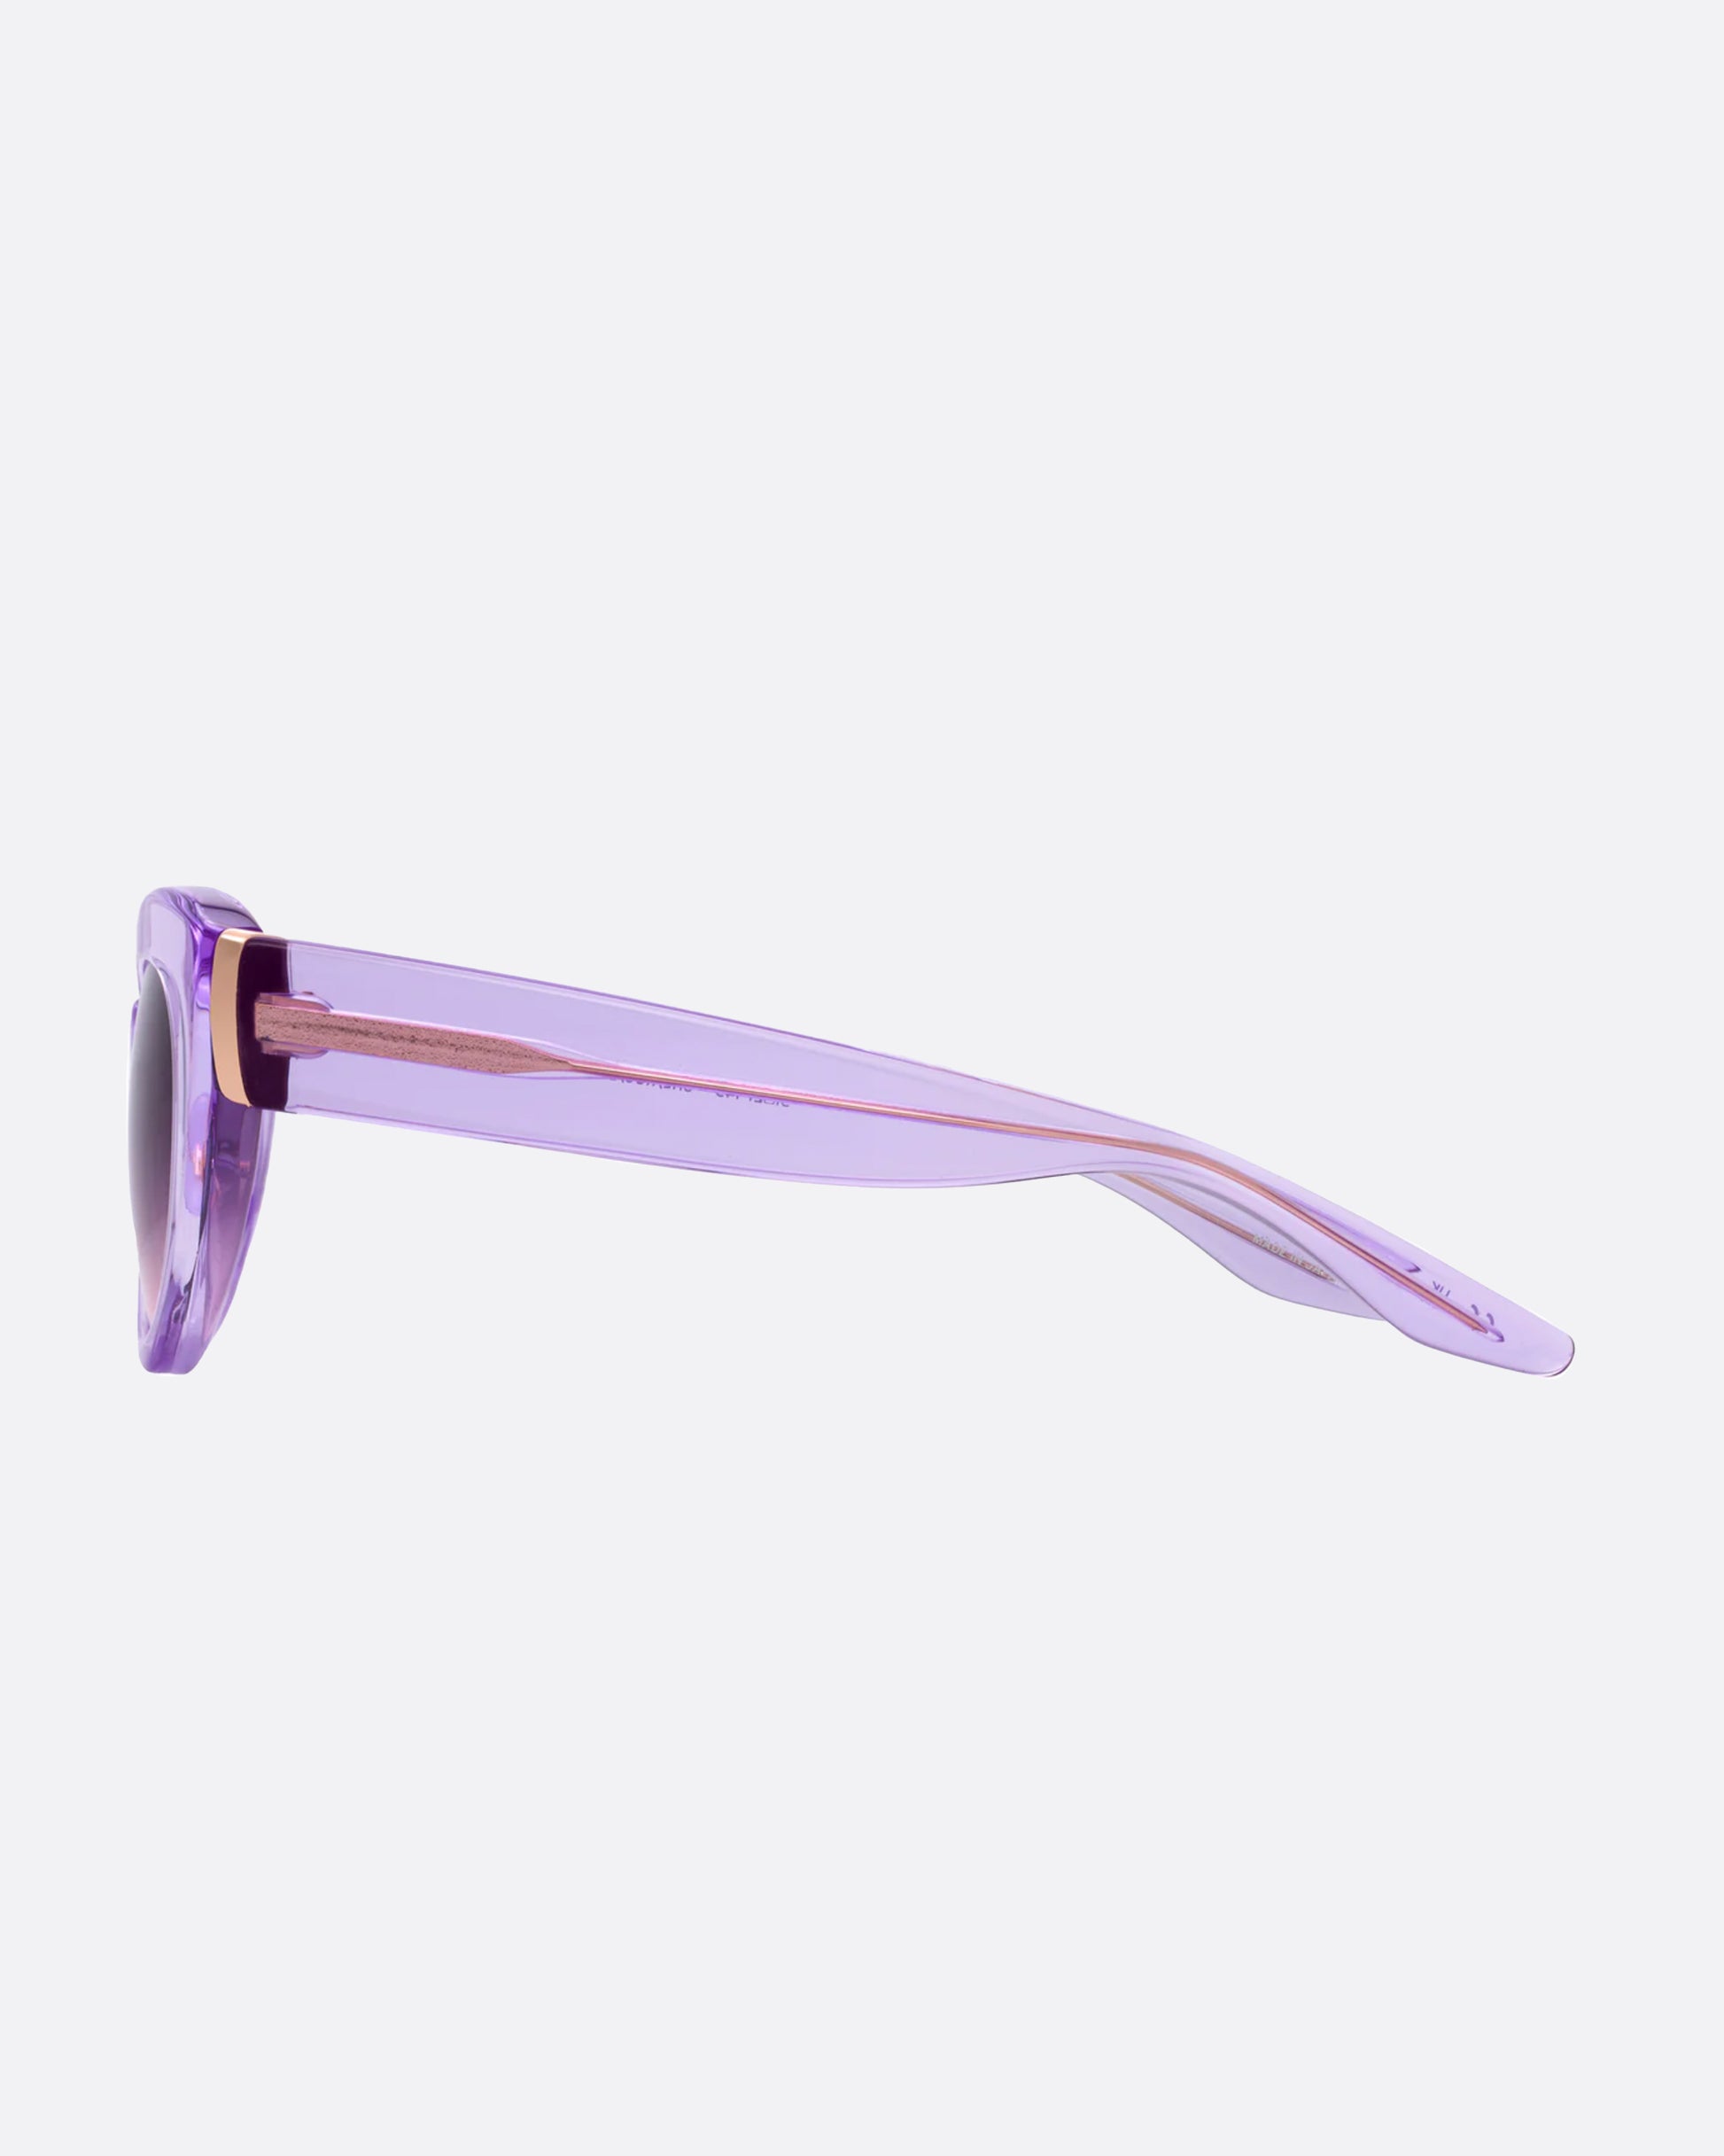 These sheer lilac frames have 24k gold plated titanium details, need we say more?